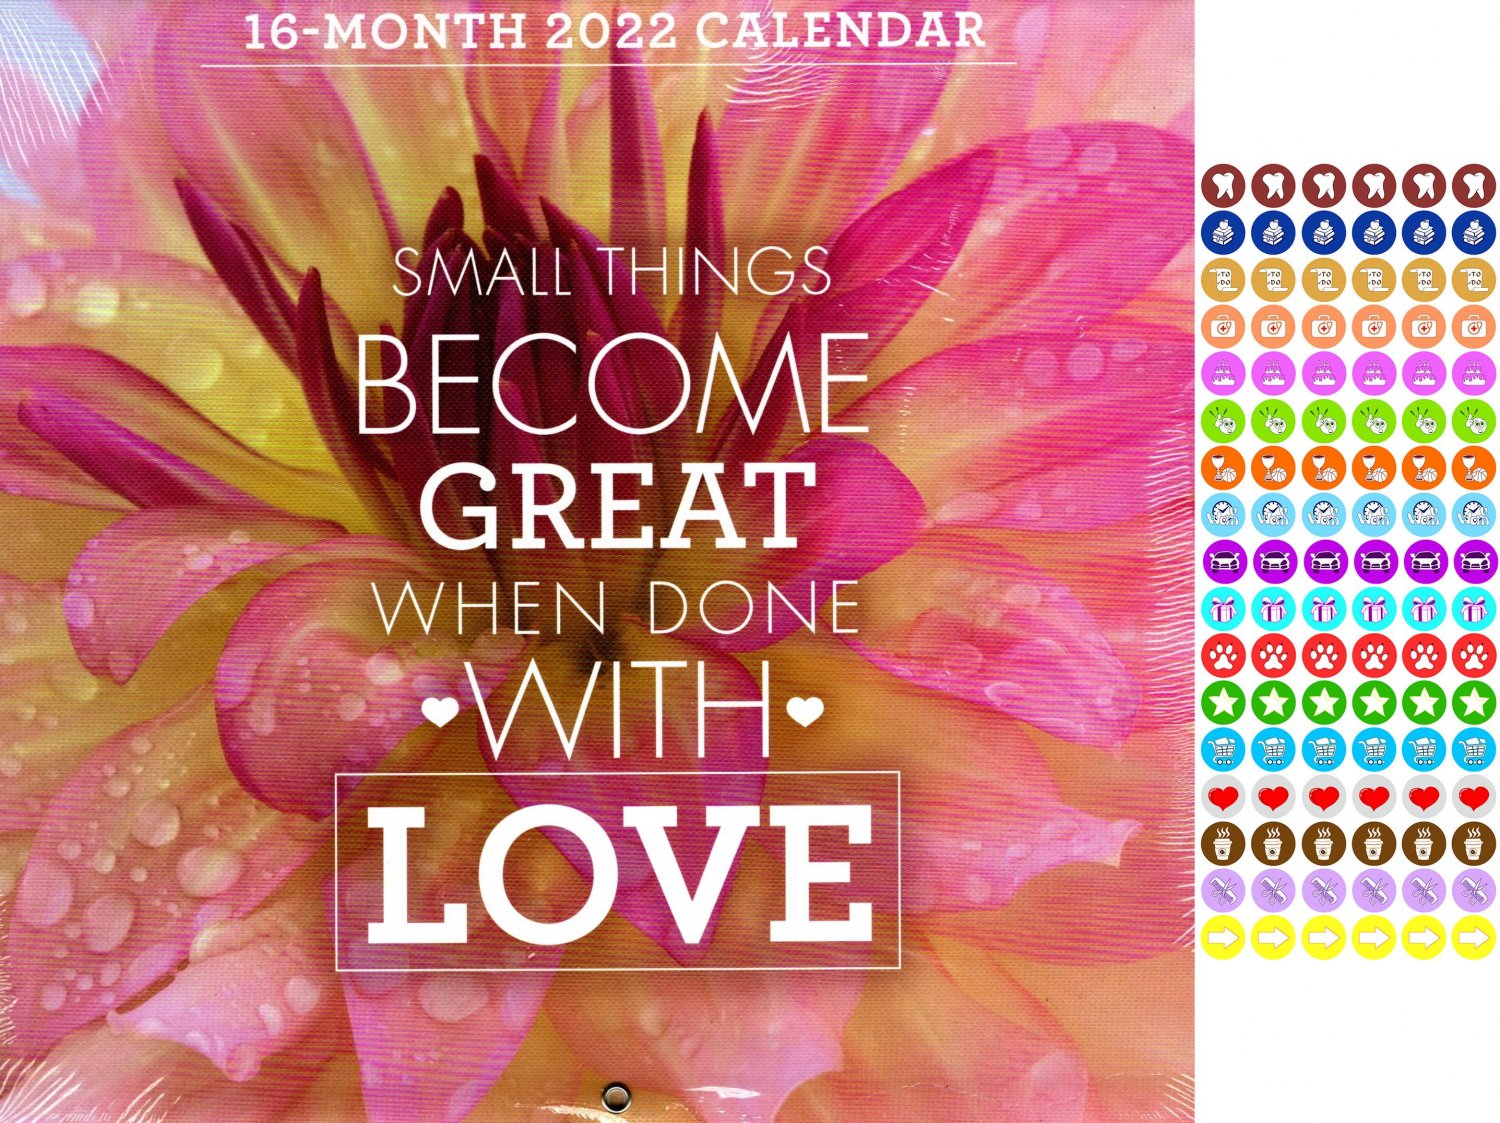 2022 16 Month Wall Calendar - Small Things Become Great When Done with Love - with 100 Stickers